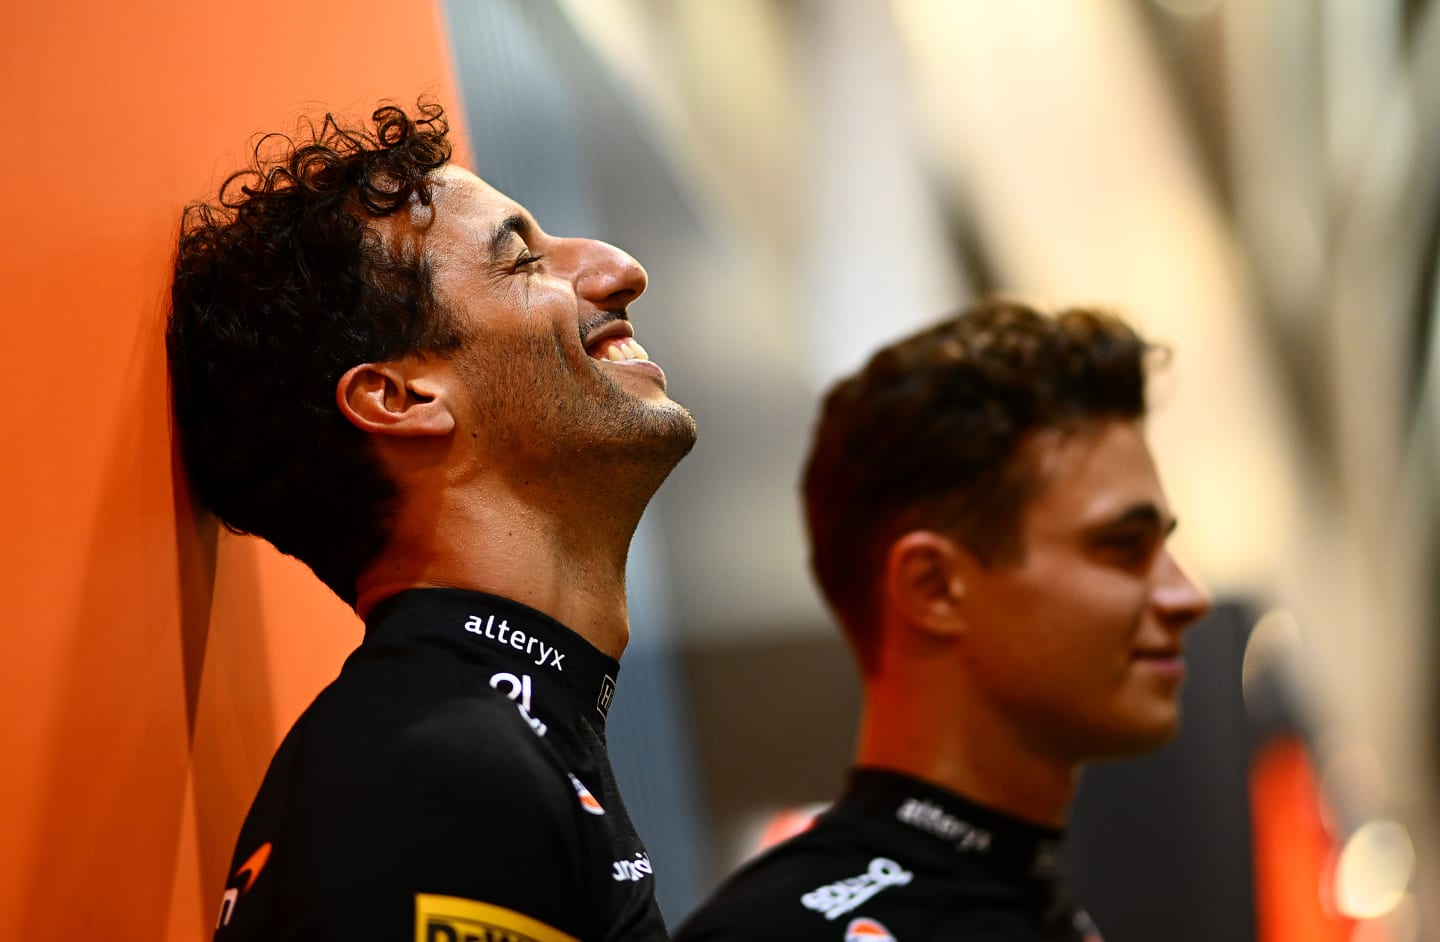 SINGAPORE, SINGAPORE - SEPTEMBER 29: Daniel Ricciardo of Australia and McLaren and Lando Norris of Great Britain and McLaren look on in the Paddock during previews ahead of the F1 Grand Prix of Singapore at Marina Bay Street Circuit on September 29, 2022 in Singapore, Singapore. (Photo by Clive Mason/Getty Images,)